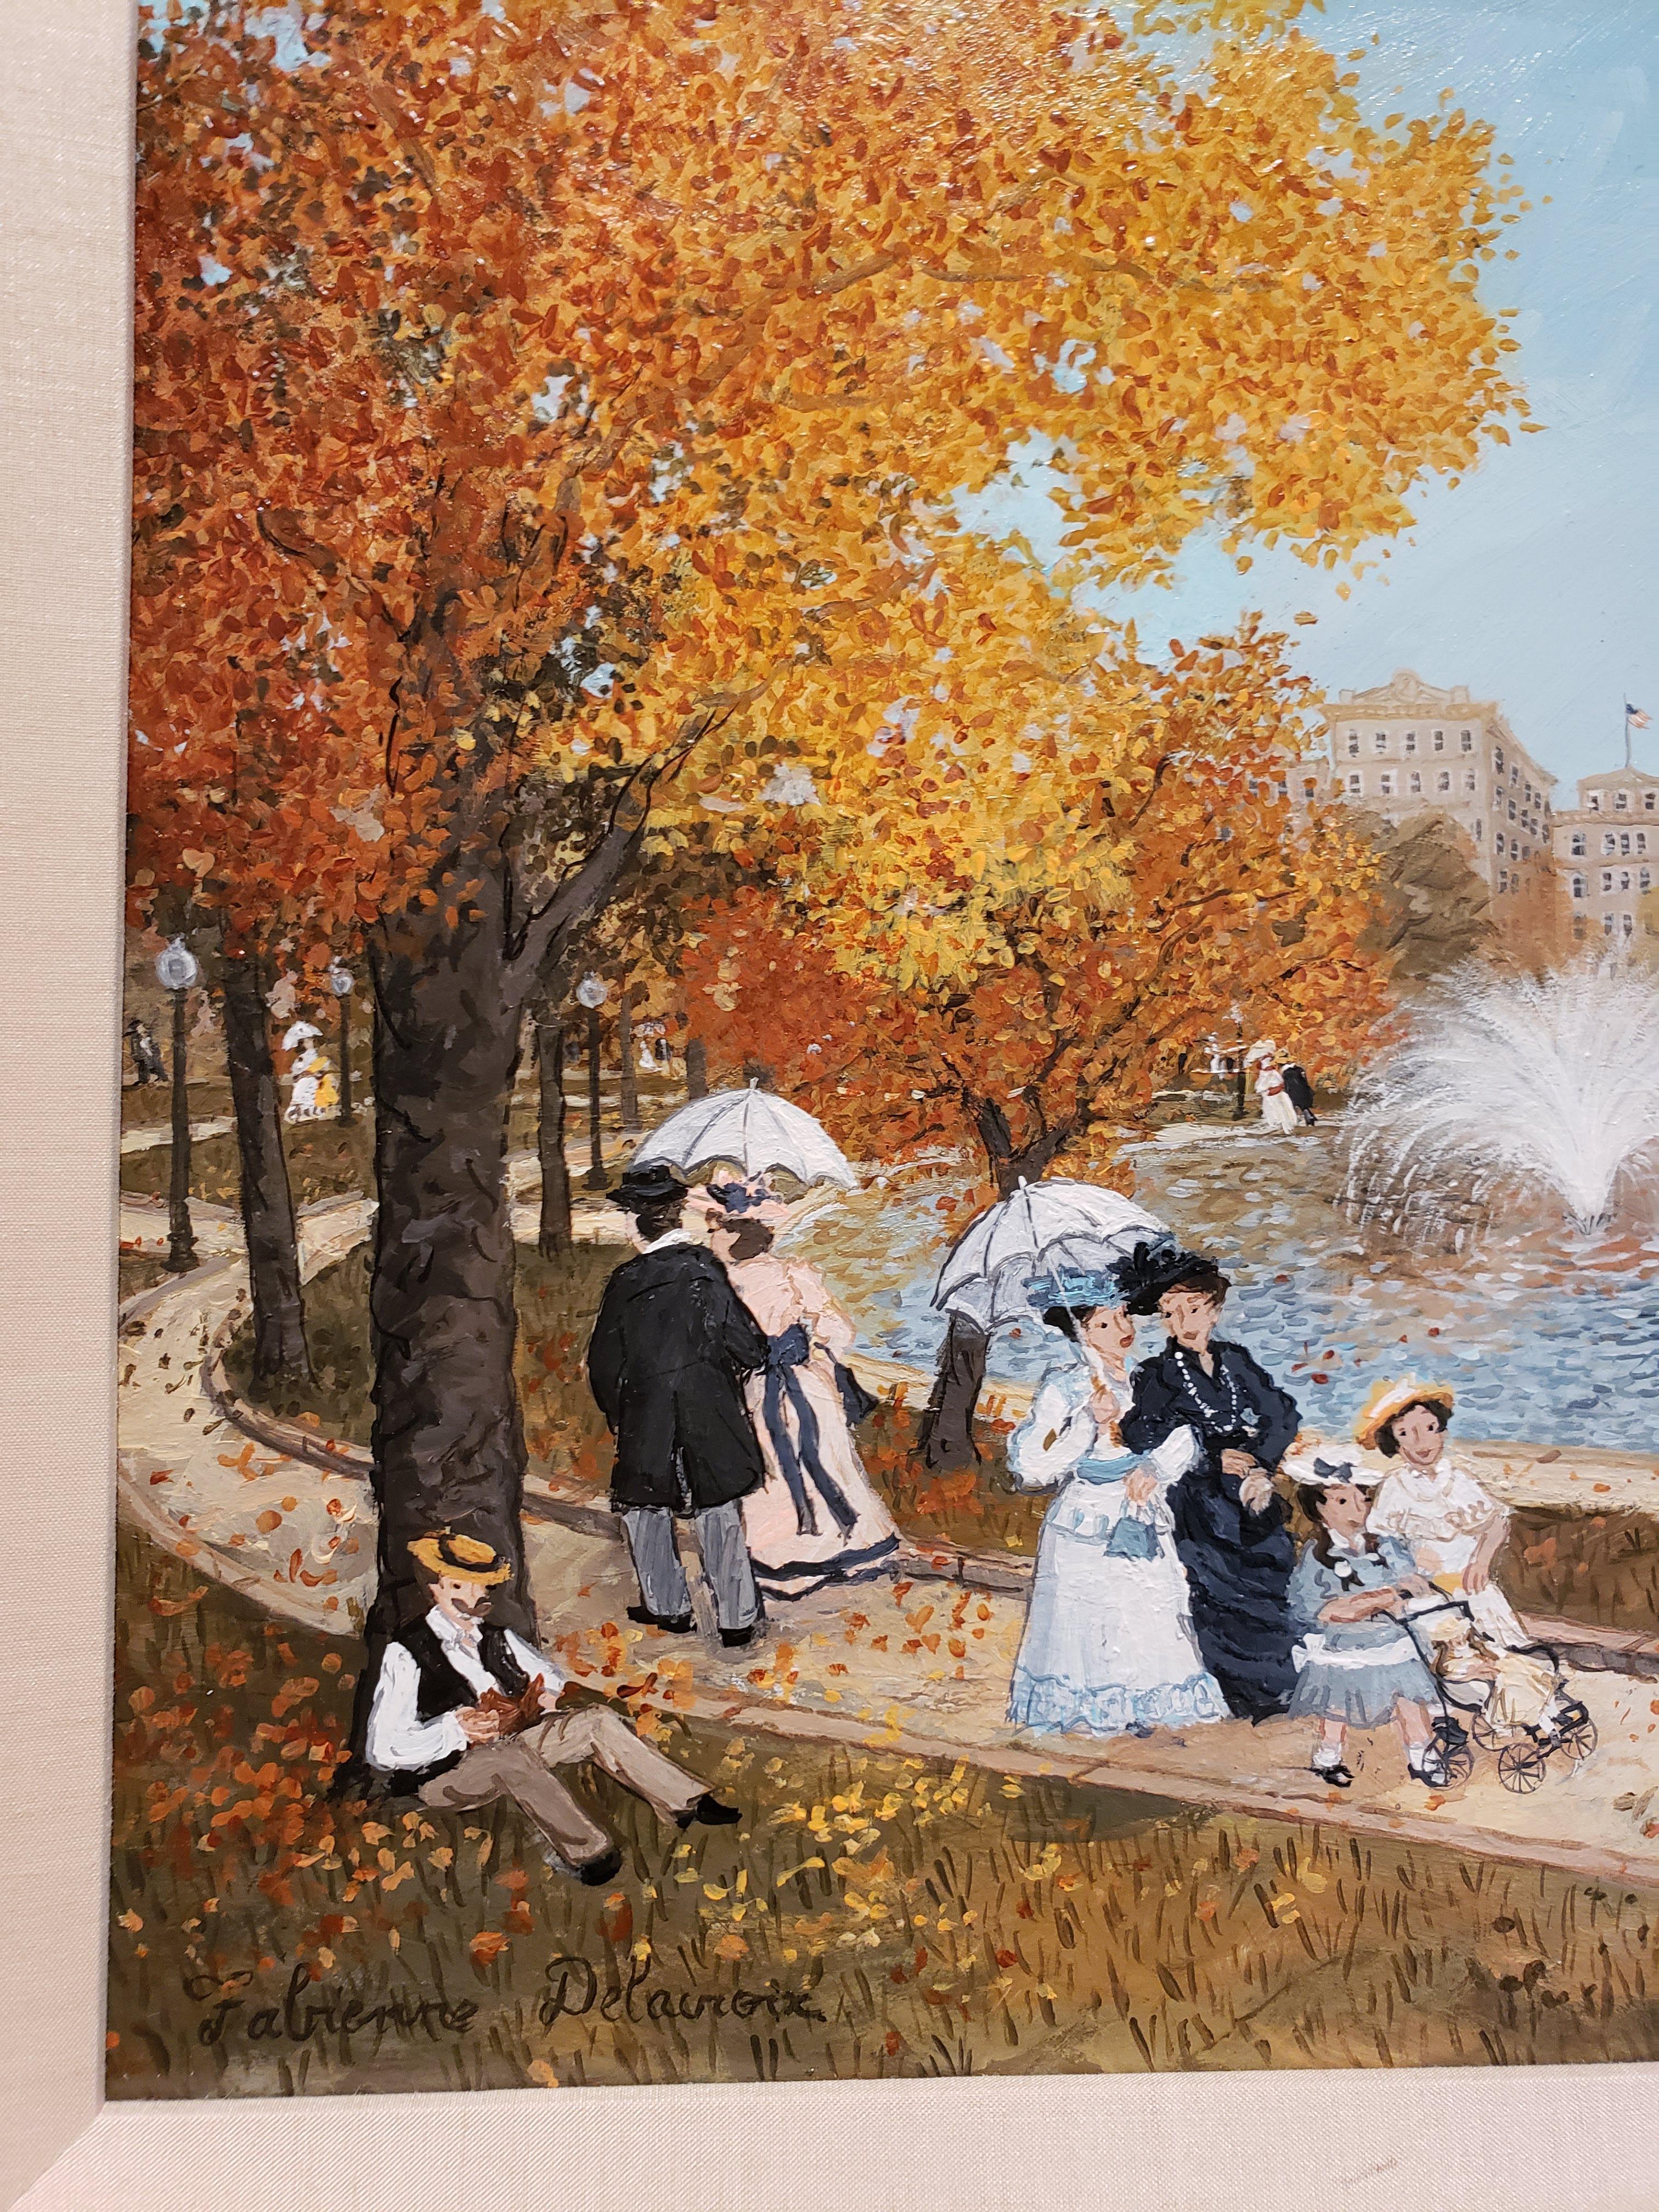 This charming impressionist acrylic painting shows people in the Boston Commons during the fall. The vibrant colors of orange, blues and greens convey an atmosphere of warmth and joy.

Fabienne Delacroix is the youngest child of the master naïf